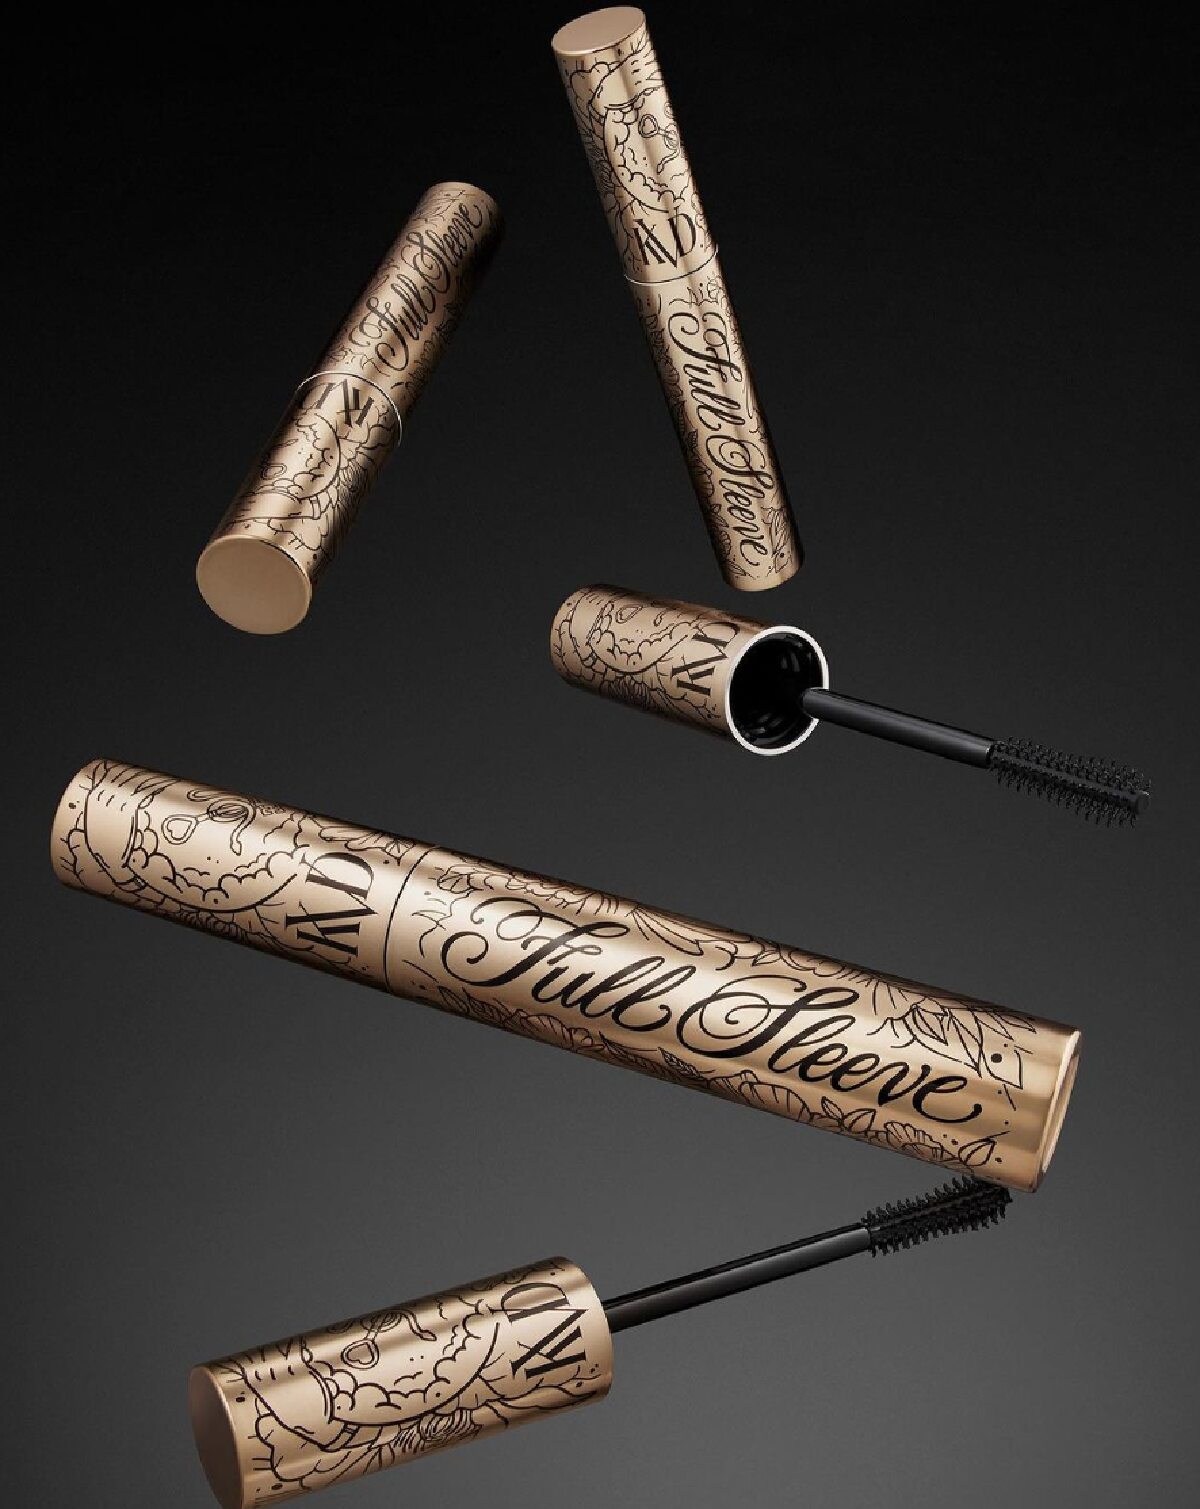 Gold tubes of KVD Beauty Full Sleeve vegan mascara in mid air against a black and gray background. 